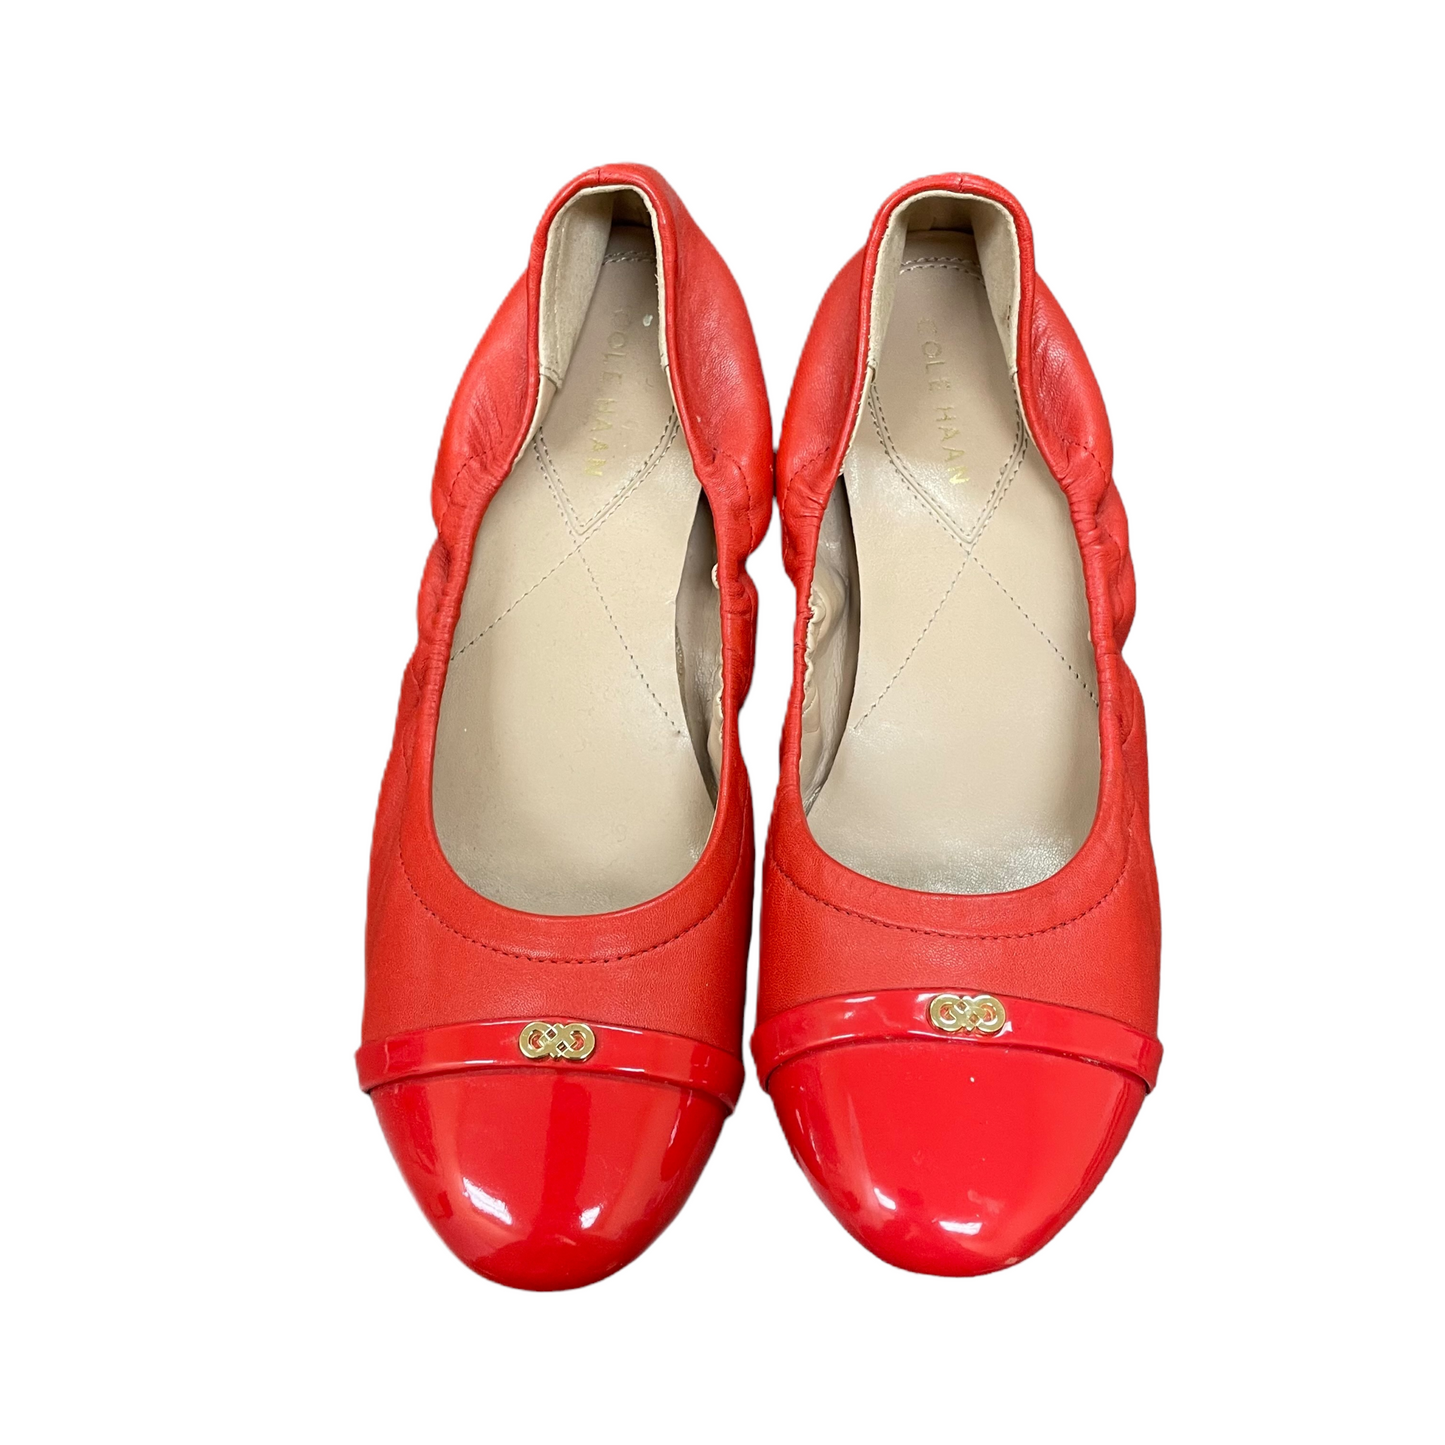 Red Shoes Flats By Cole-haan, Size: 6.5